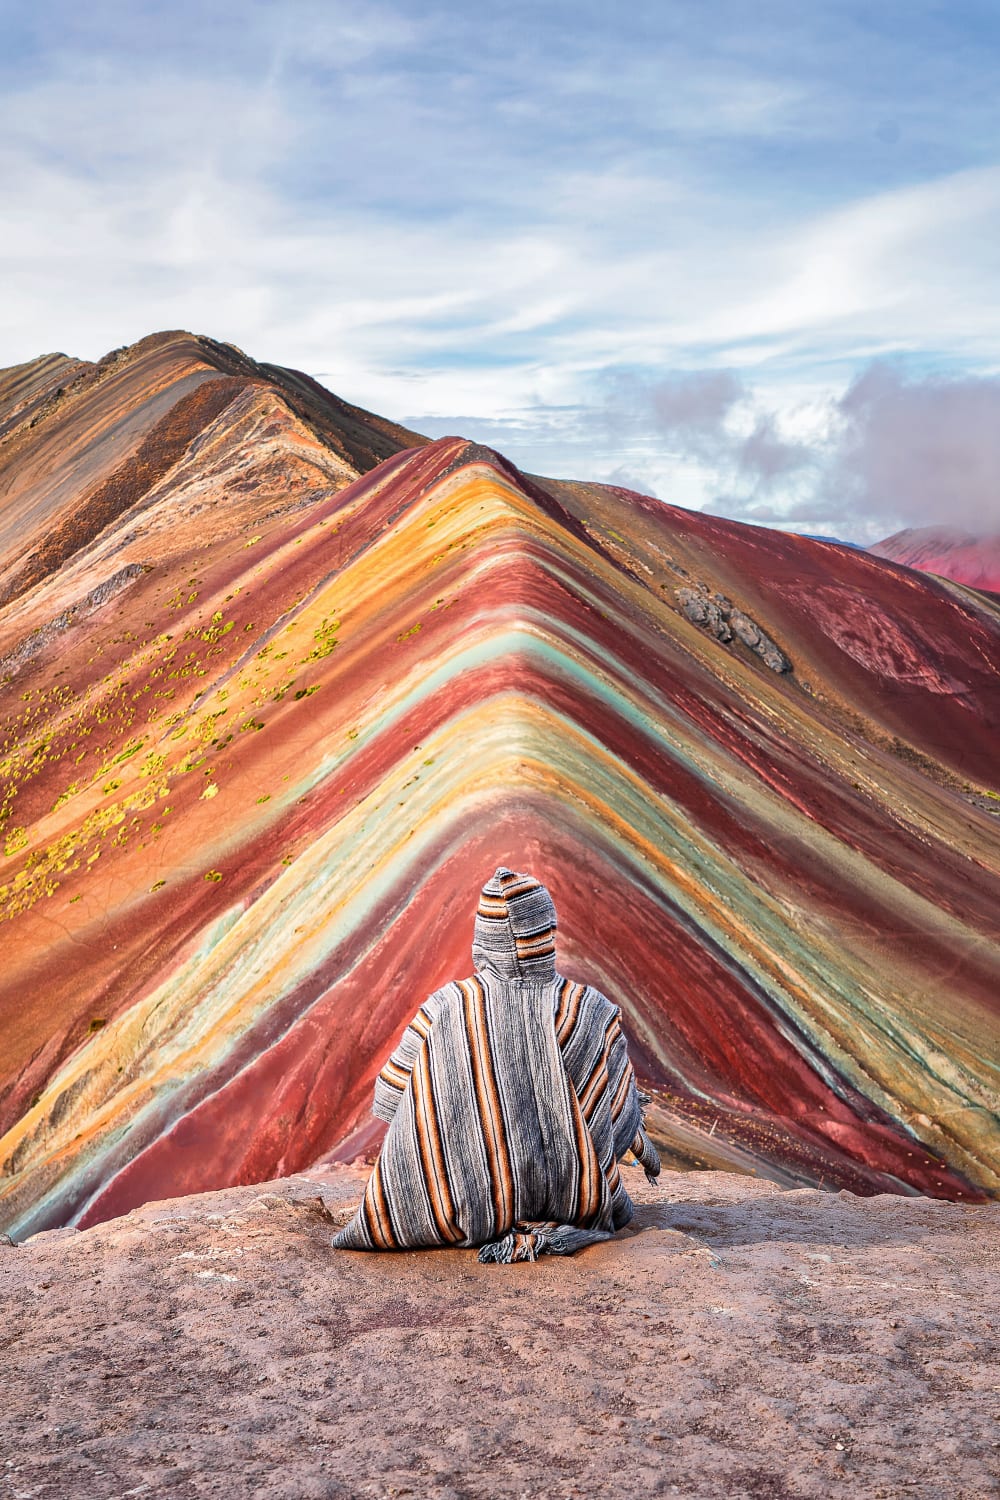 Top 5 Most “Instagram-able” Spots in Peru